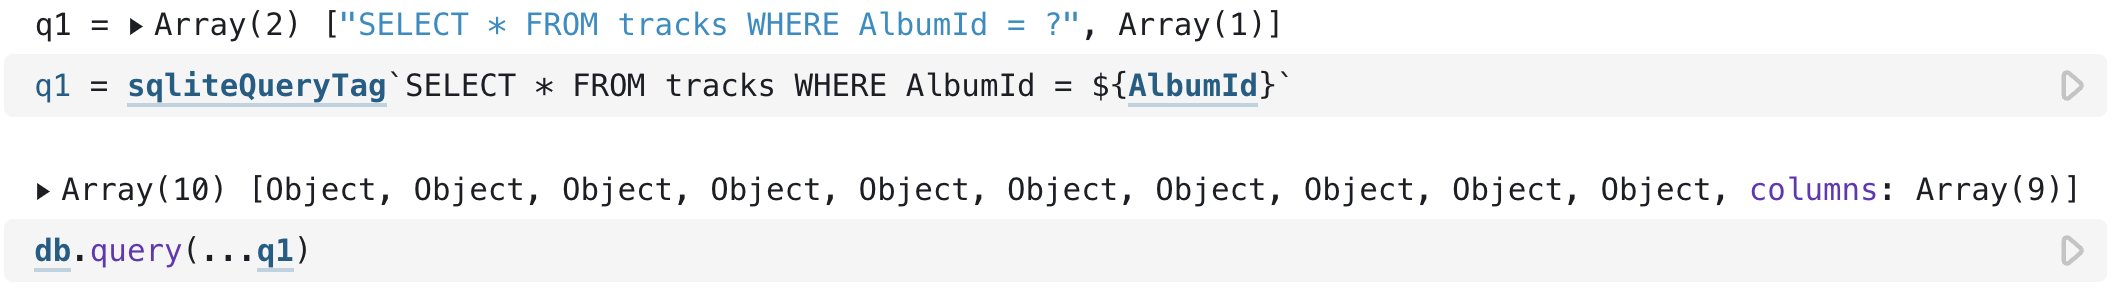 Screenshot of invoking the sqliteQueryTag function created above to query the tracks table. Code reads: q1 = sqliteQueryTag`SELECT * FROM tracks WHERE AlbumId = ${AlbumId}`.